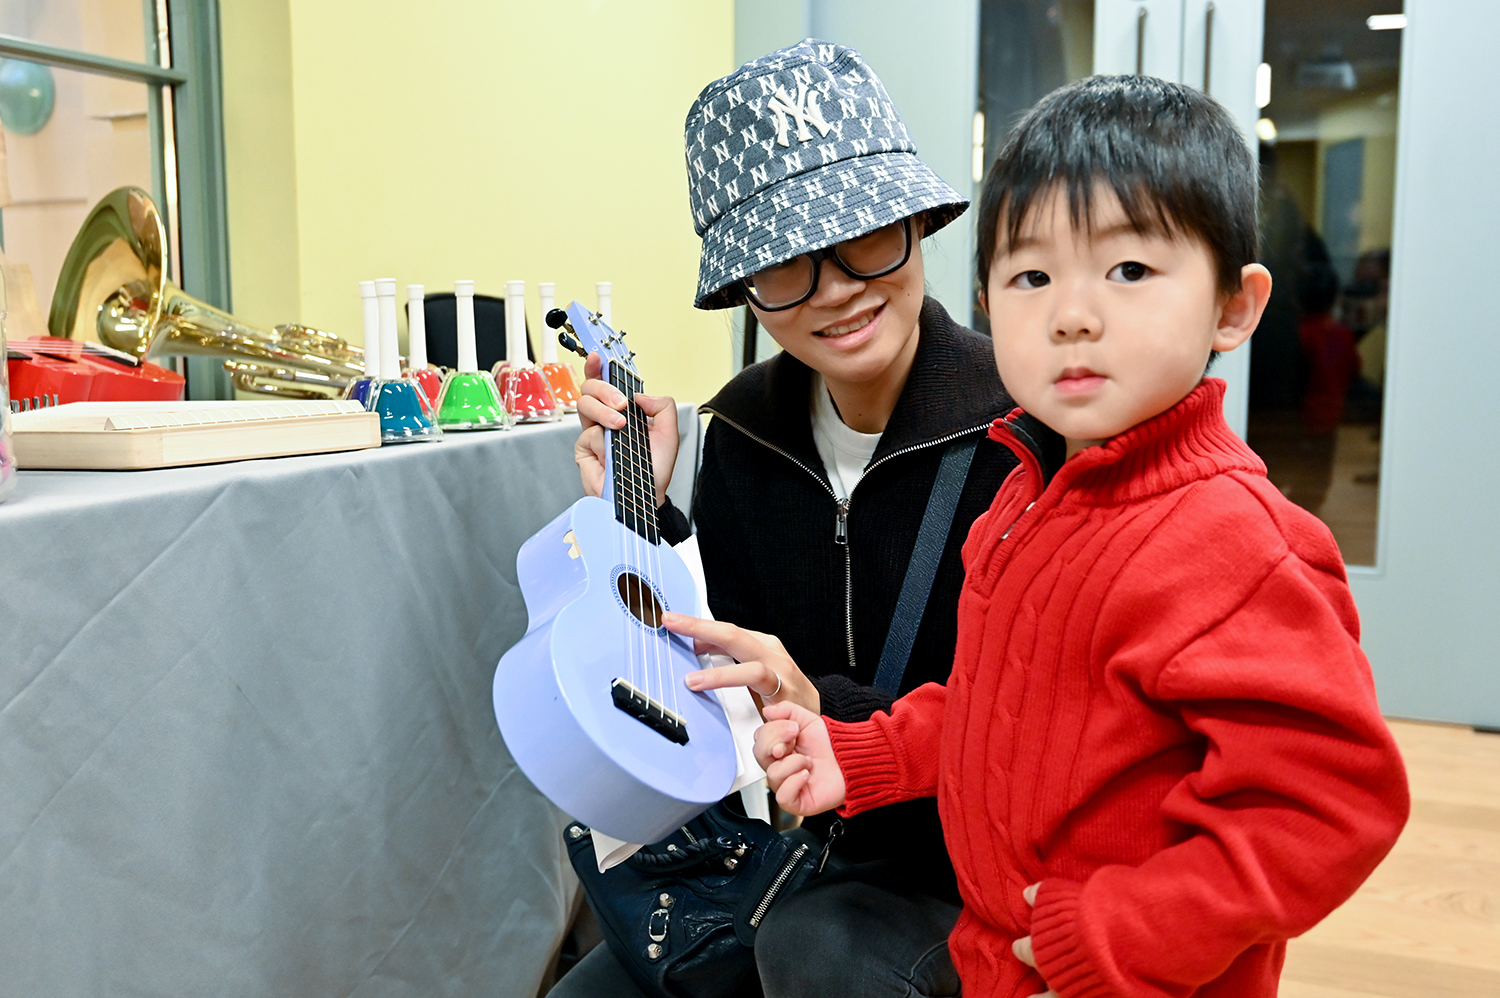 A little boy with black hair and a red jumper poses next to a woman sitting next to him and holding a pale blue ukulele